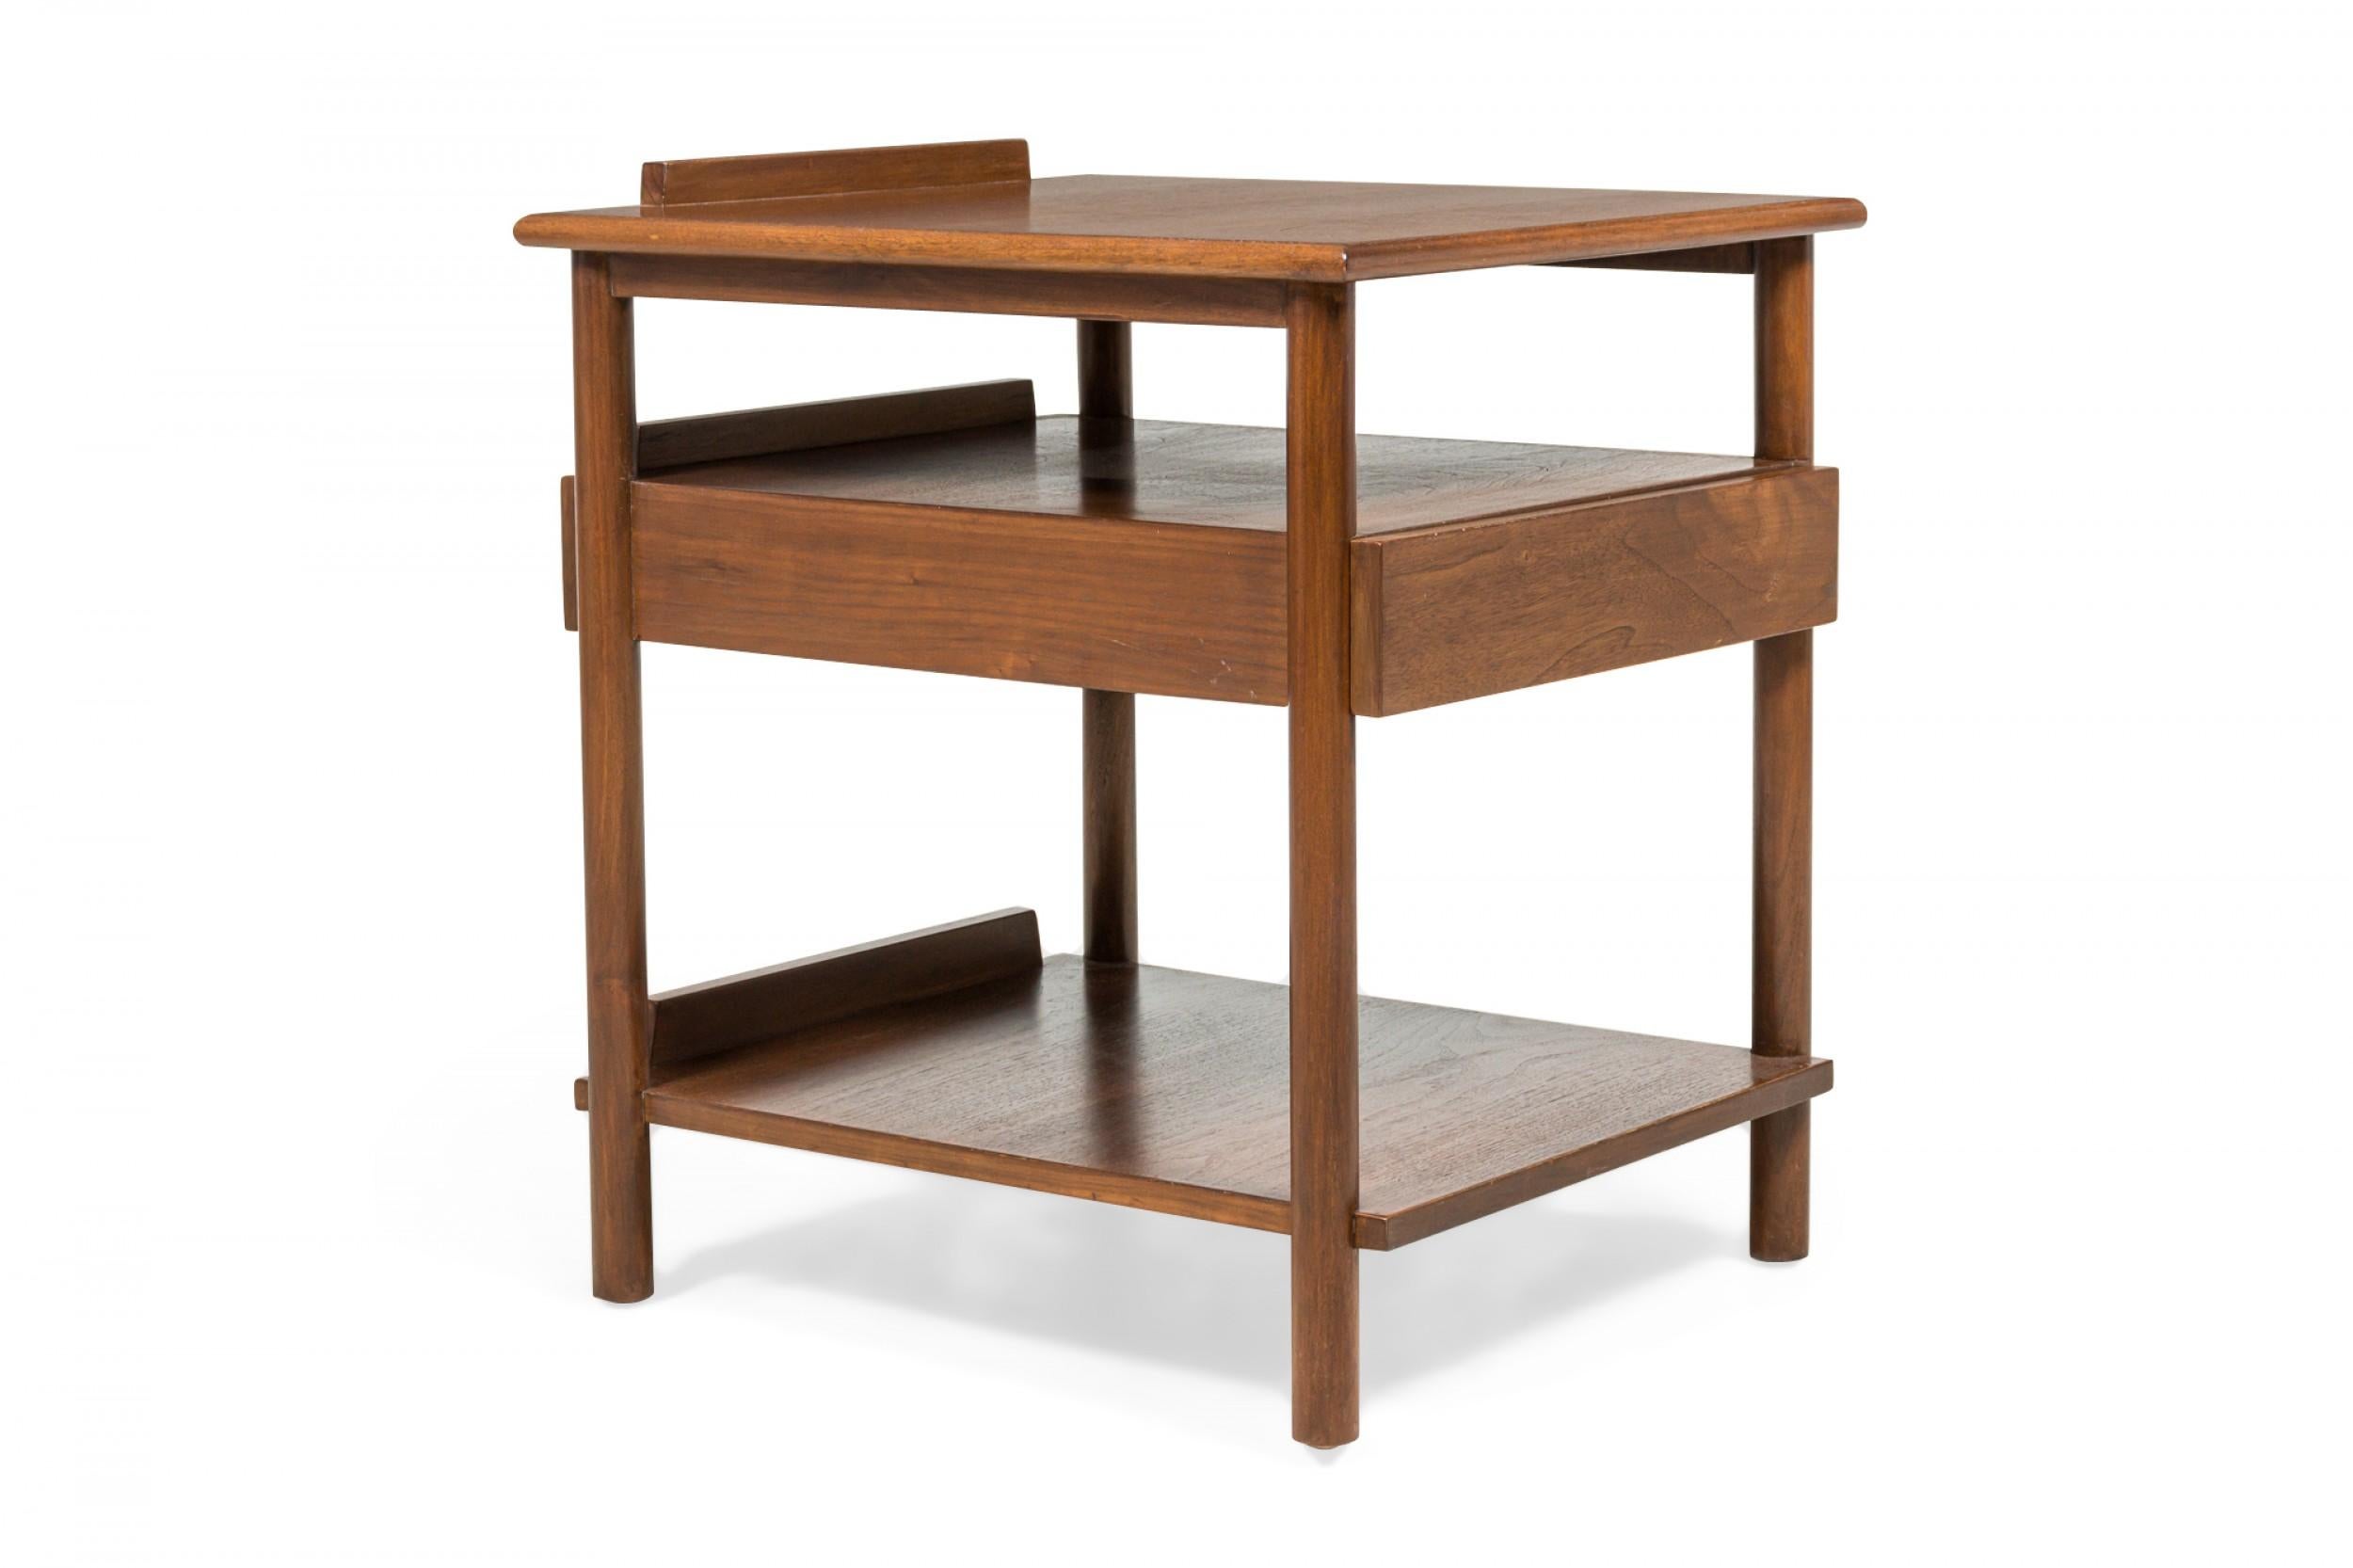 Pair of American mid-century walnut end / side tables with dowel legs supporting an open design structure with a rectangular table top, single drawer, and lower stretcher shelf. (John Stuart)(Priced as Pair).
  